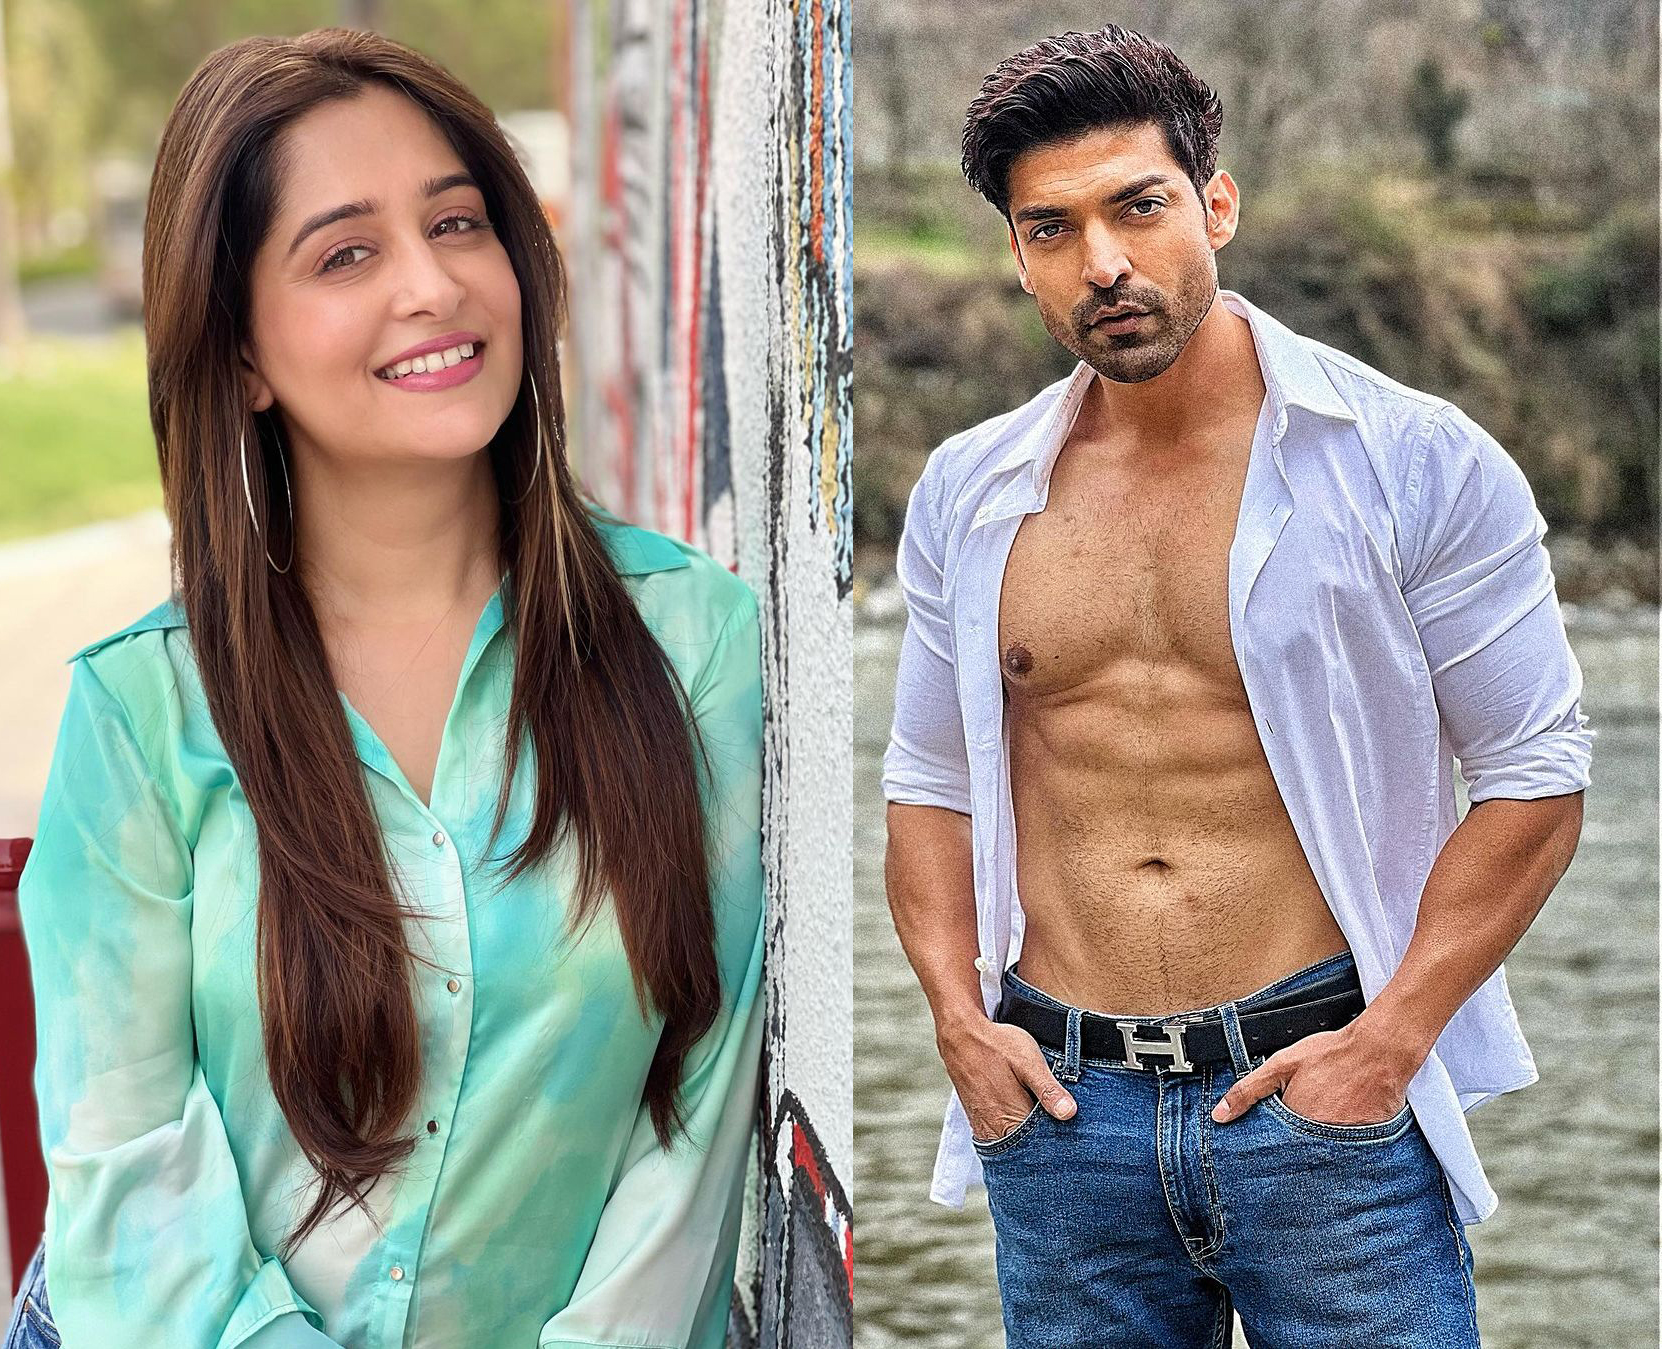 Gurmeet Choudhary Shared His Experience Of Working With Dipika Kakar. Did He Attend Her Wedding? Find Out Here!